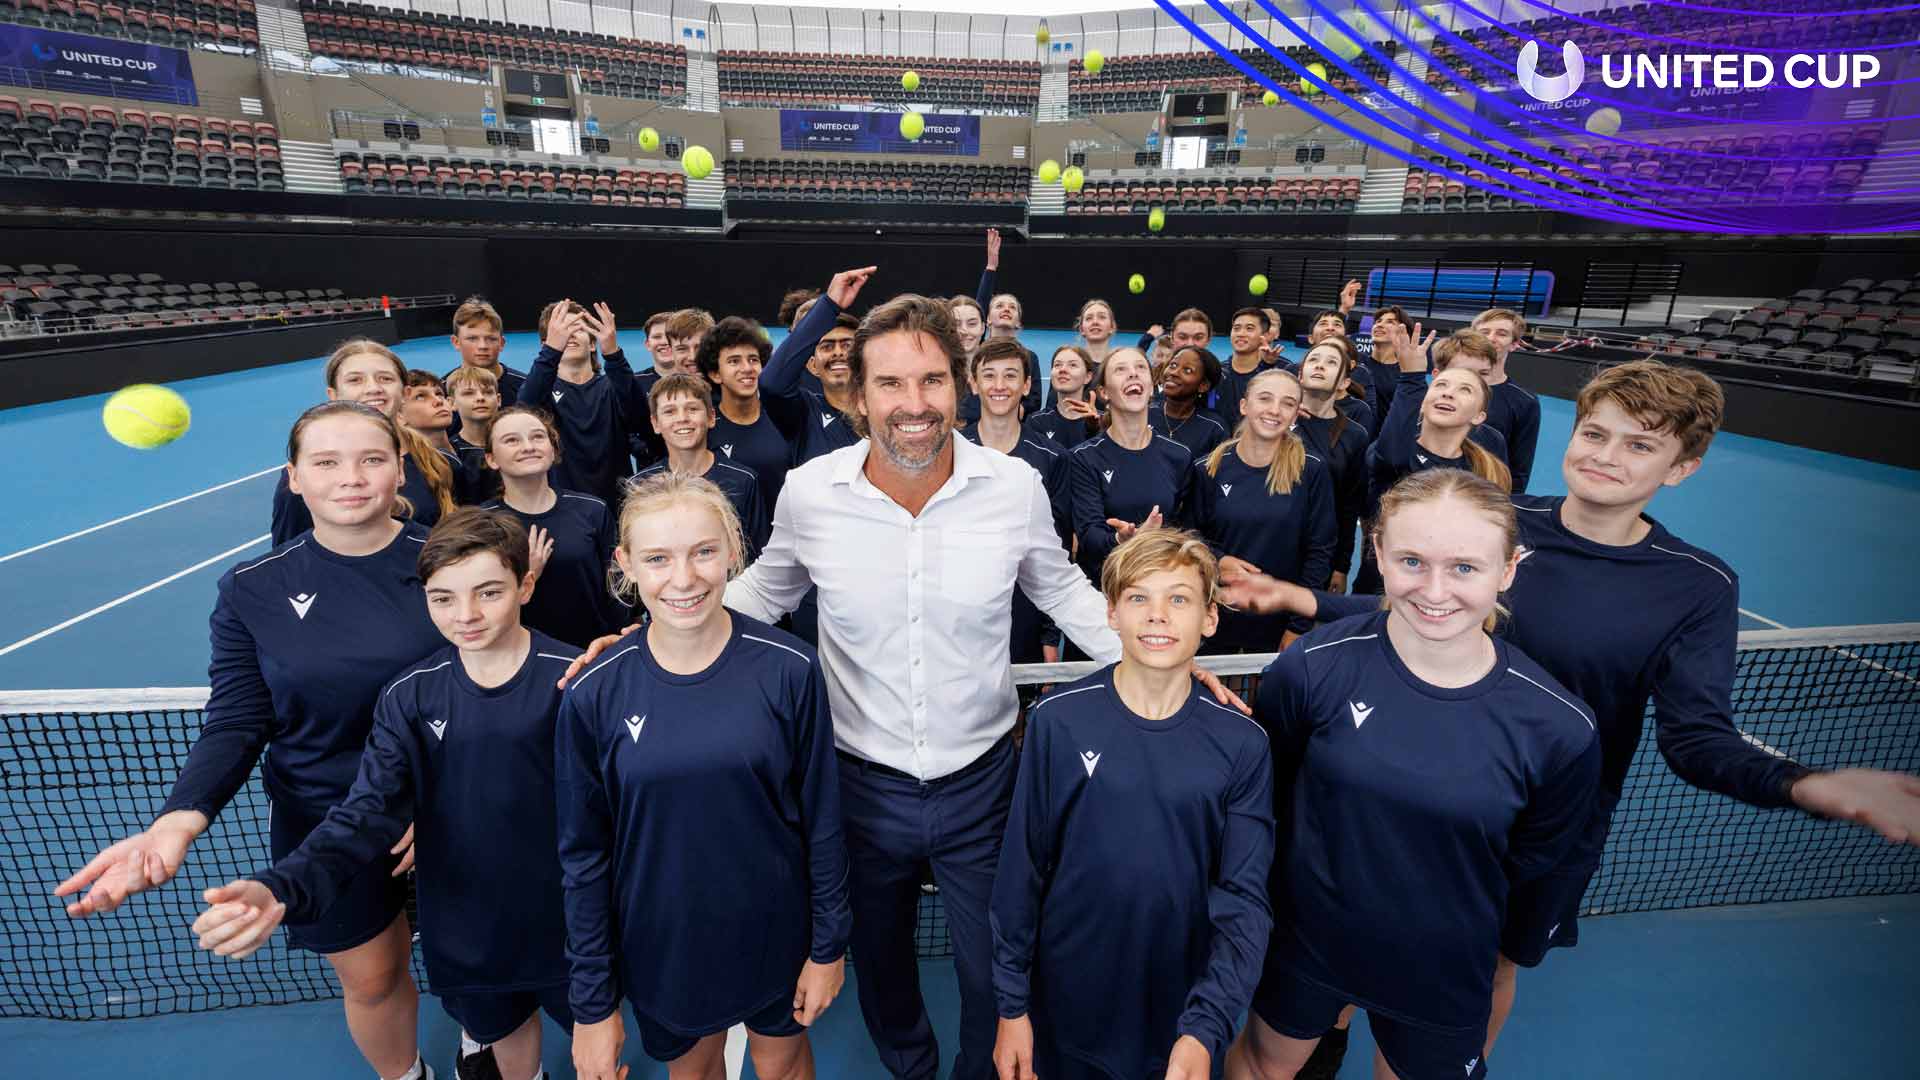 Patrick Rafter meets ball kids on Sunday at Brisbane's Pat Rafter Arena, a group-stage venue for the inaugrual United Cup.